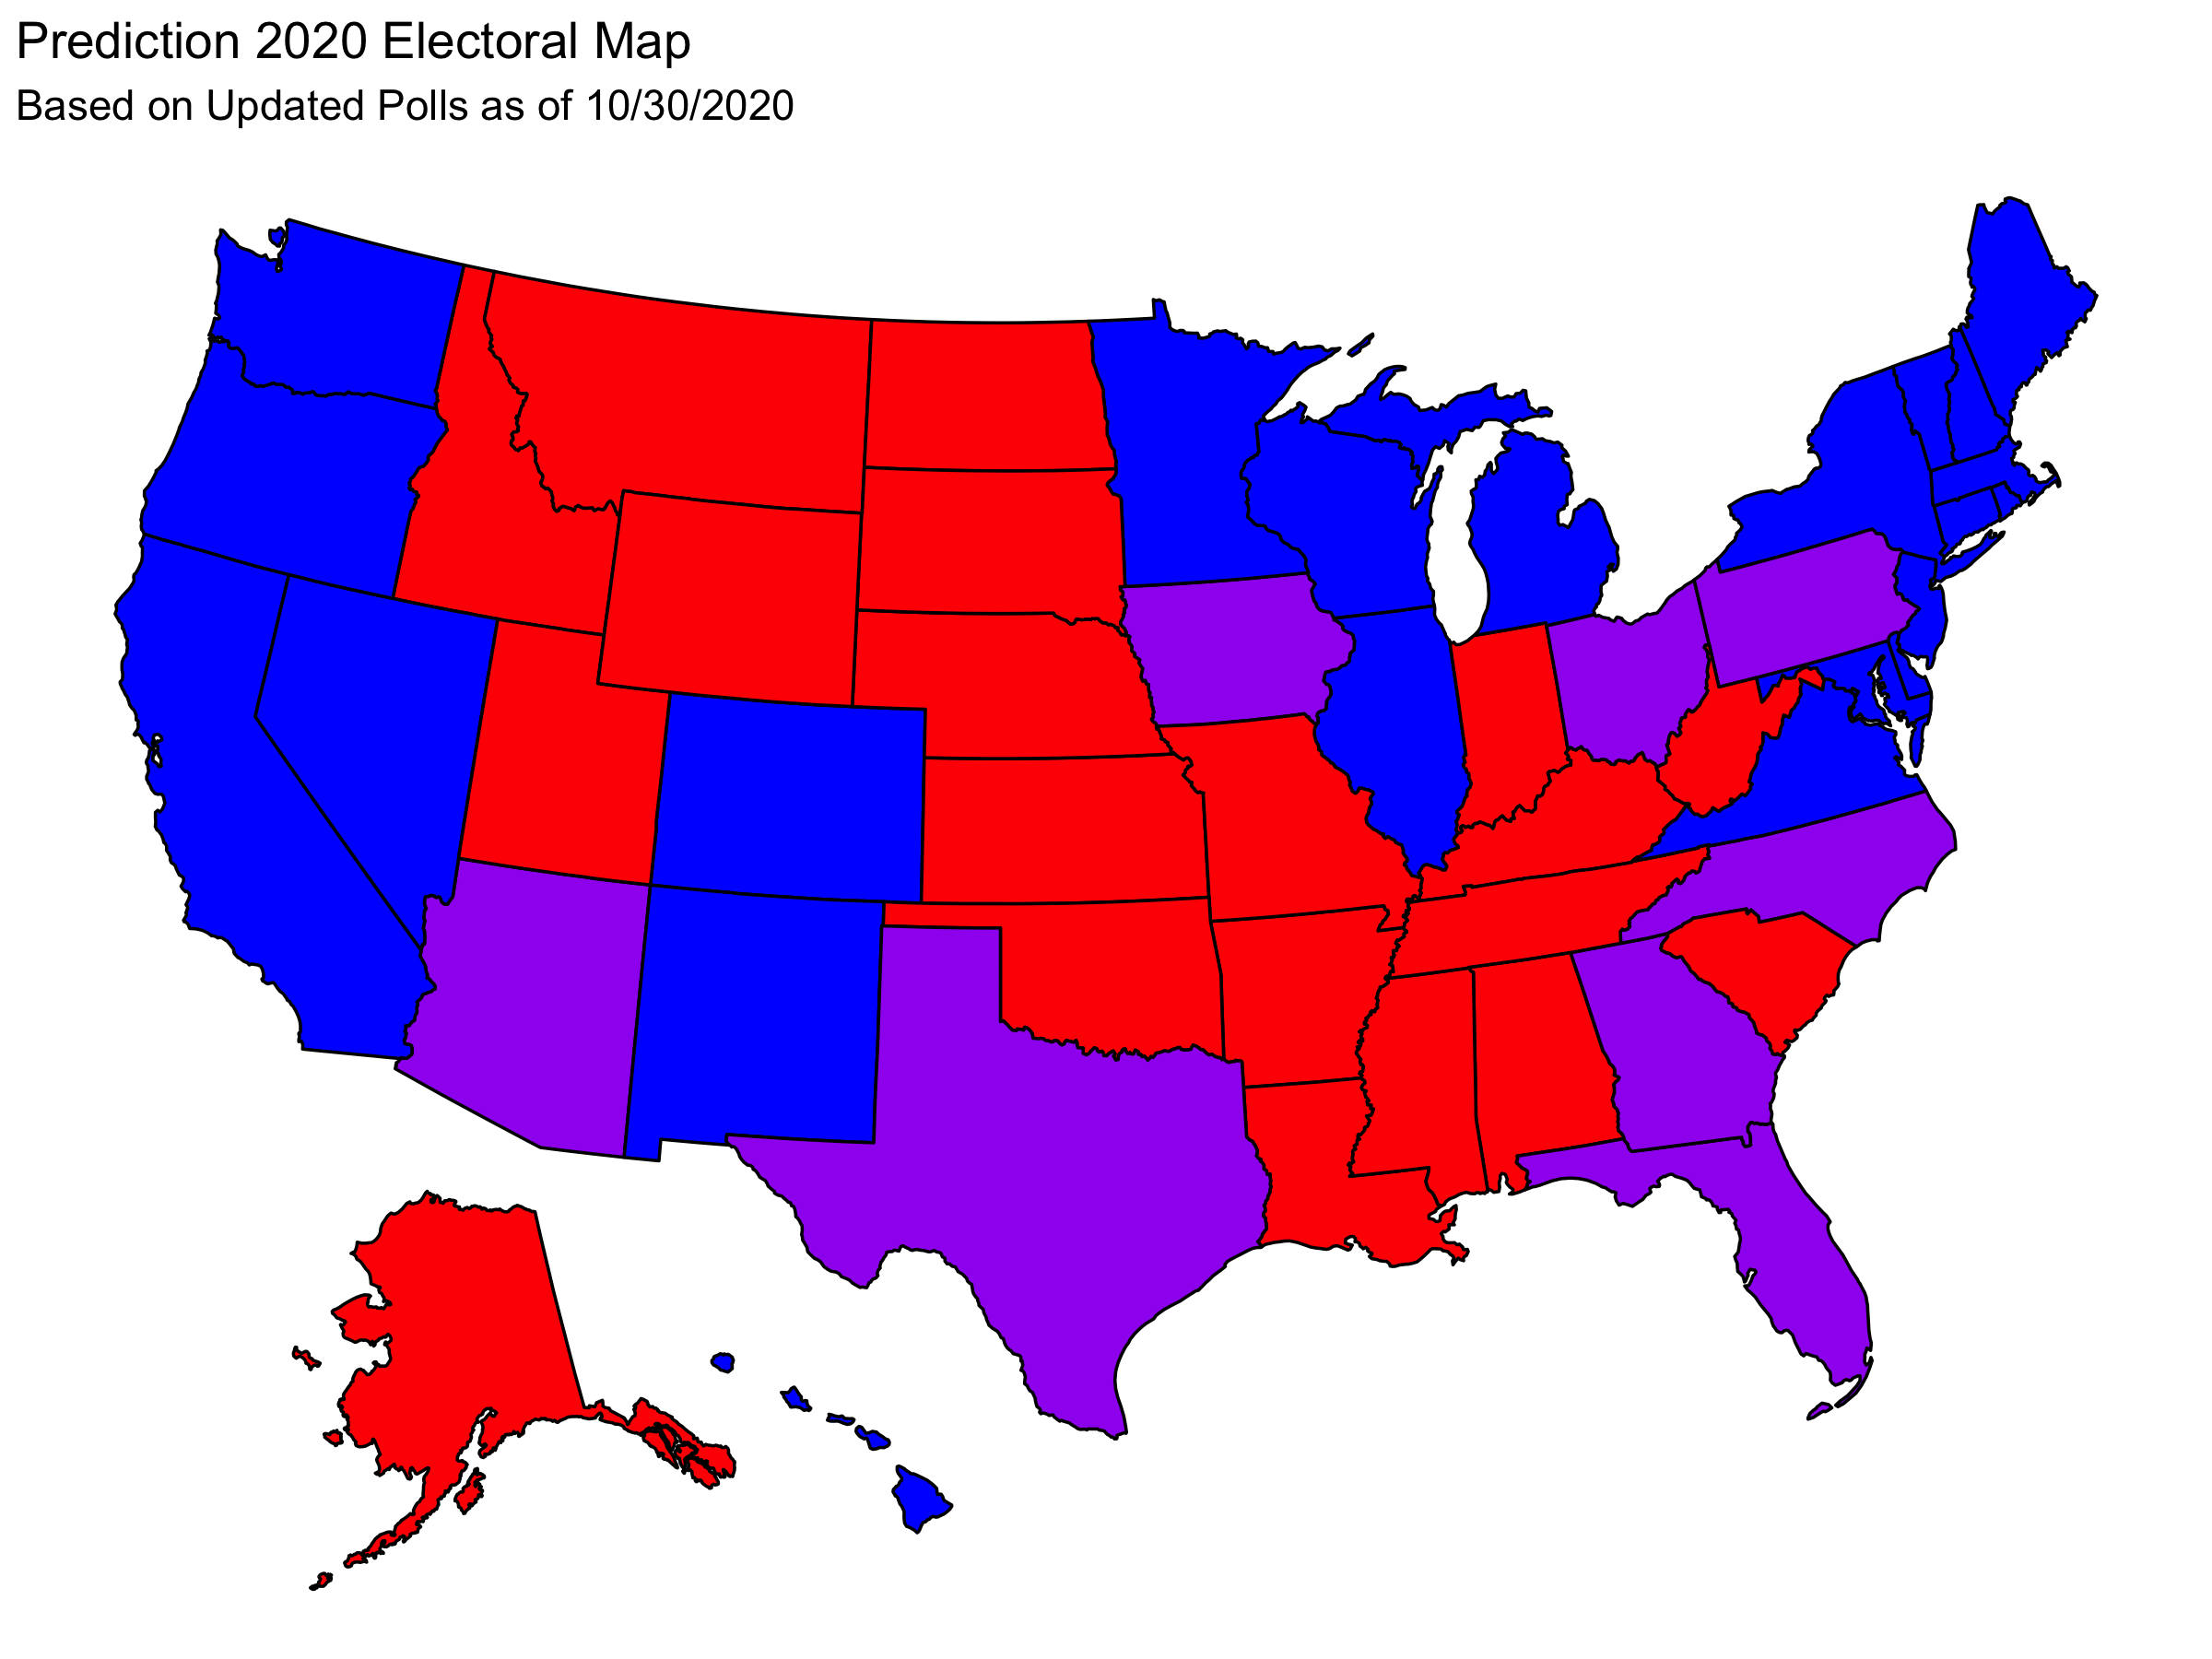 electoral map with uncertainty from state popular vote predictions